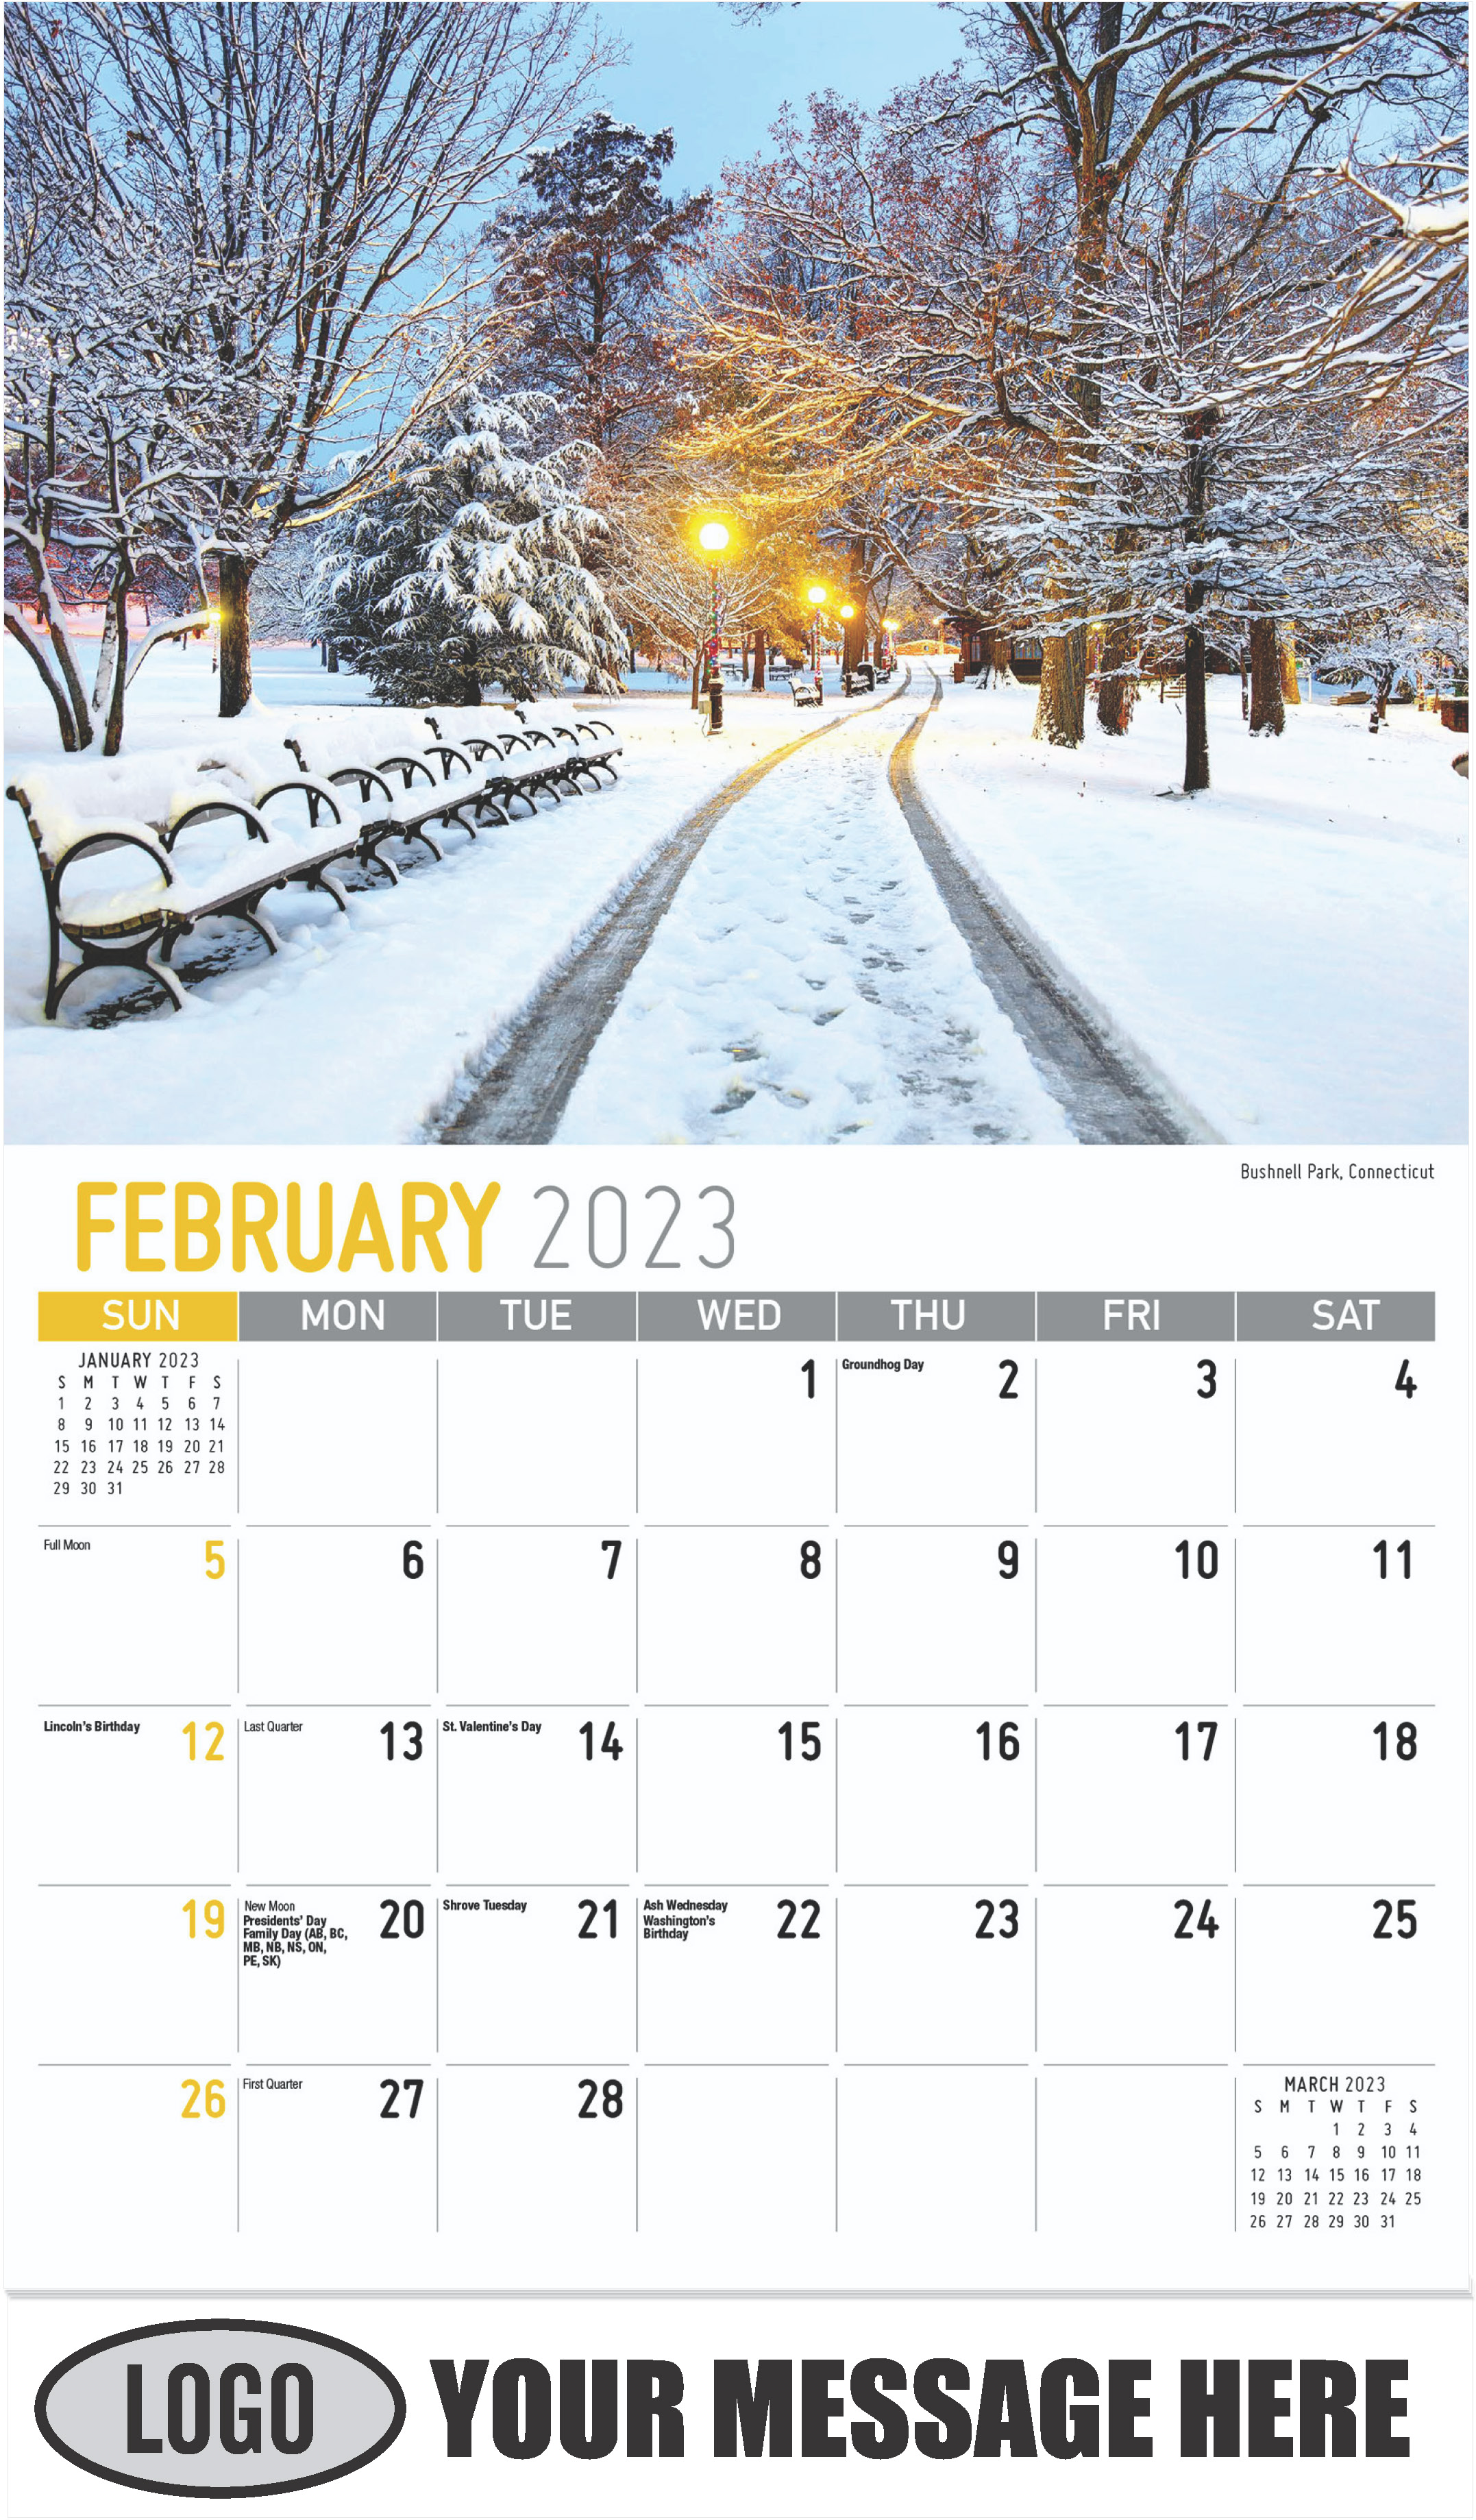 Bushnell Park, Connecticut - February - Scenes of New England 2023 Promotional Calendar